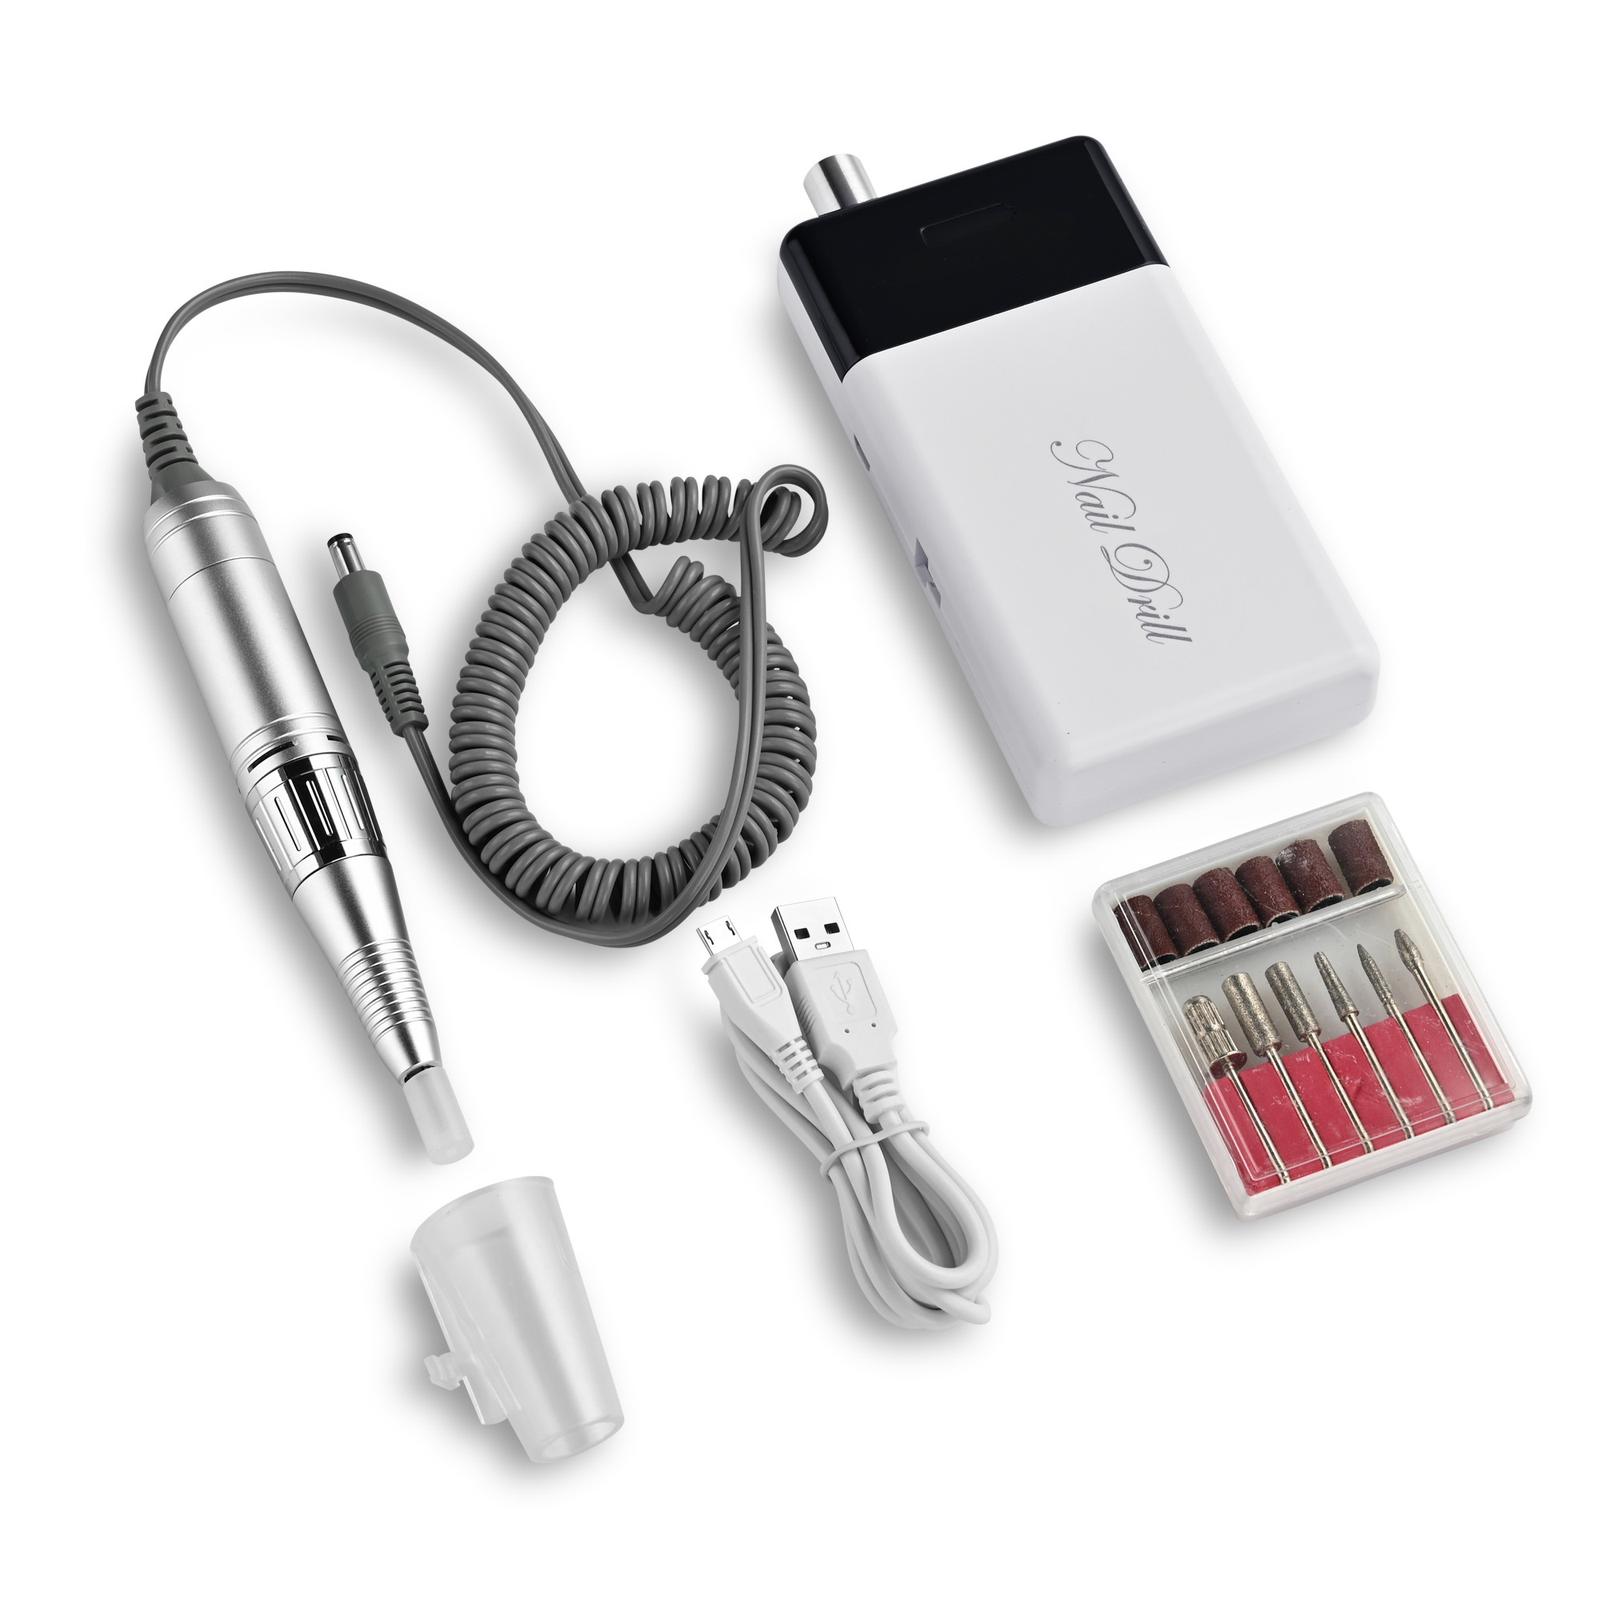 Nail drill machine with accessories and USB cable